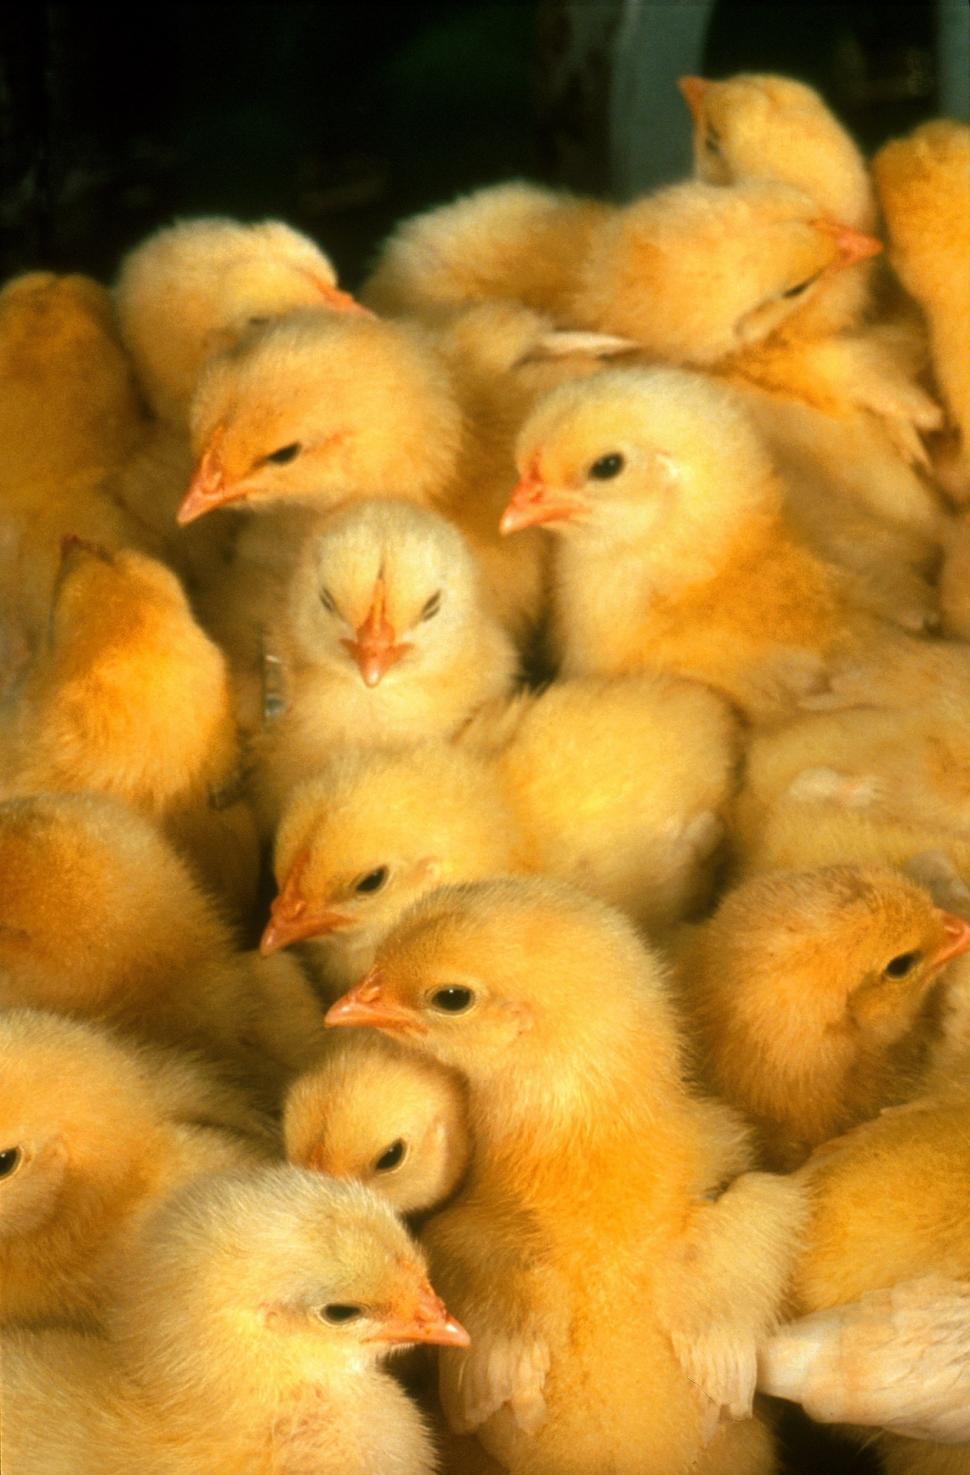 Free Image of Group of Little Yellow Chicks Huddled Together 